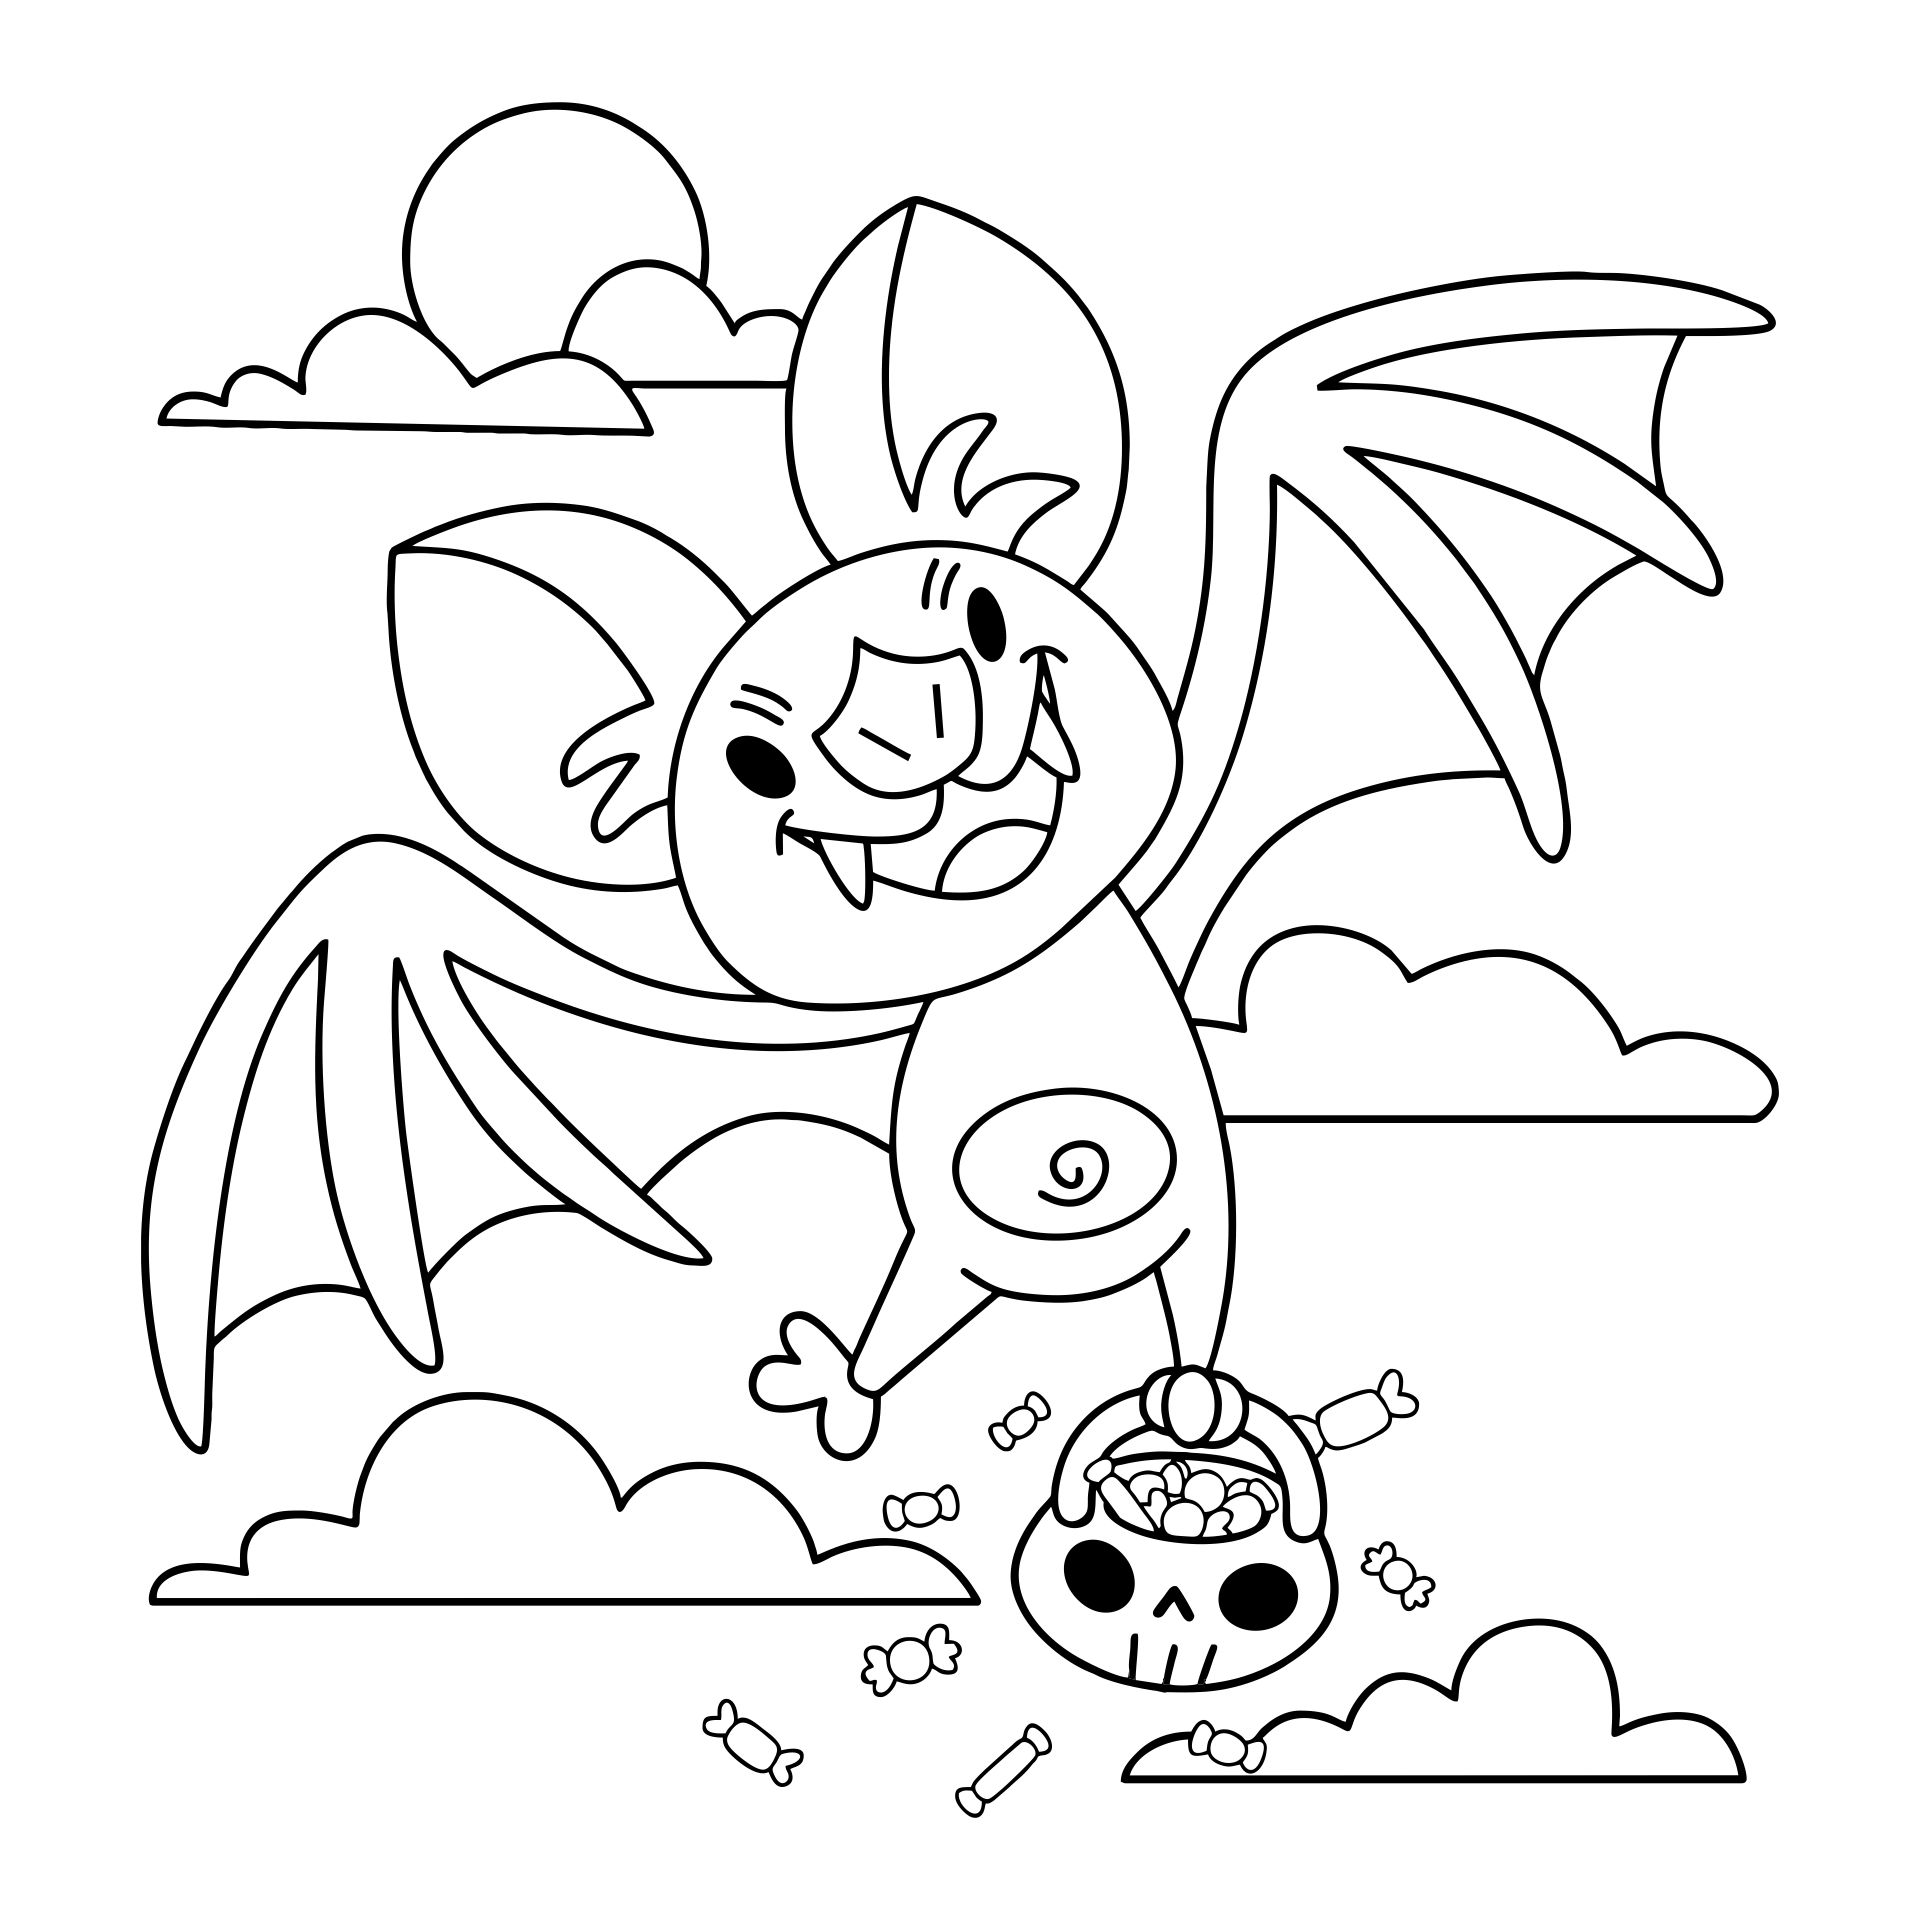 printable-halloween-safety-coloring-book-ryan-fritz-s-coloring-pages